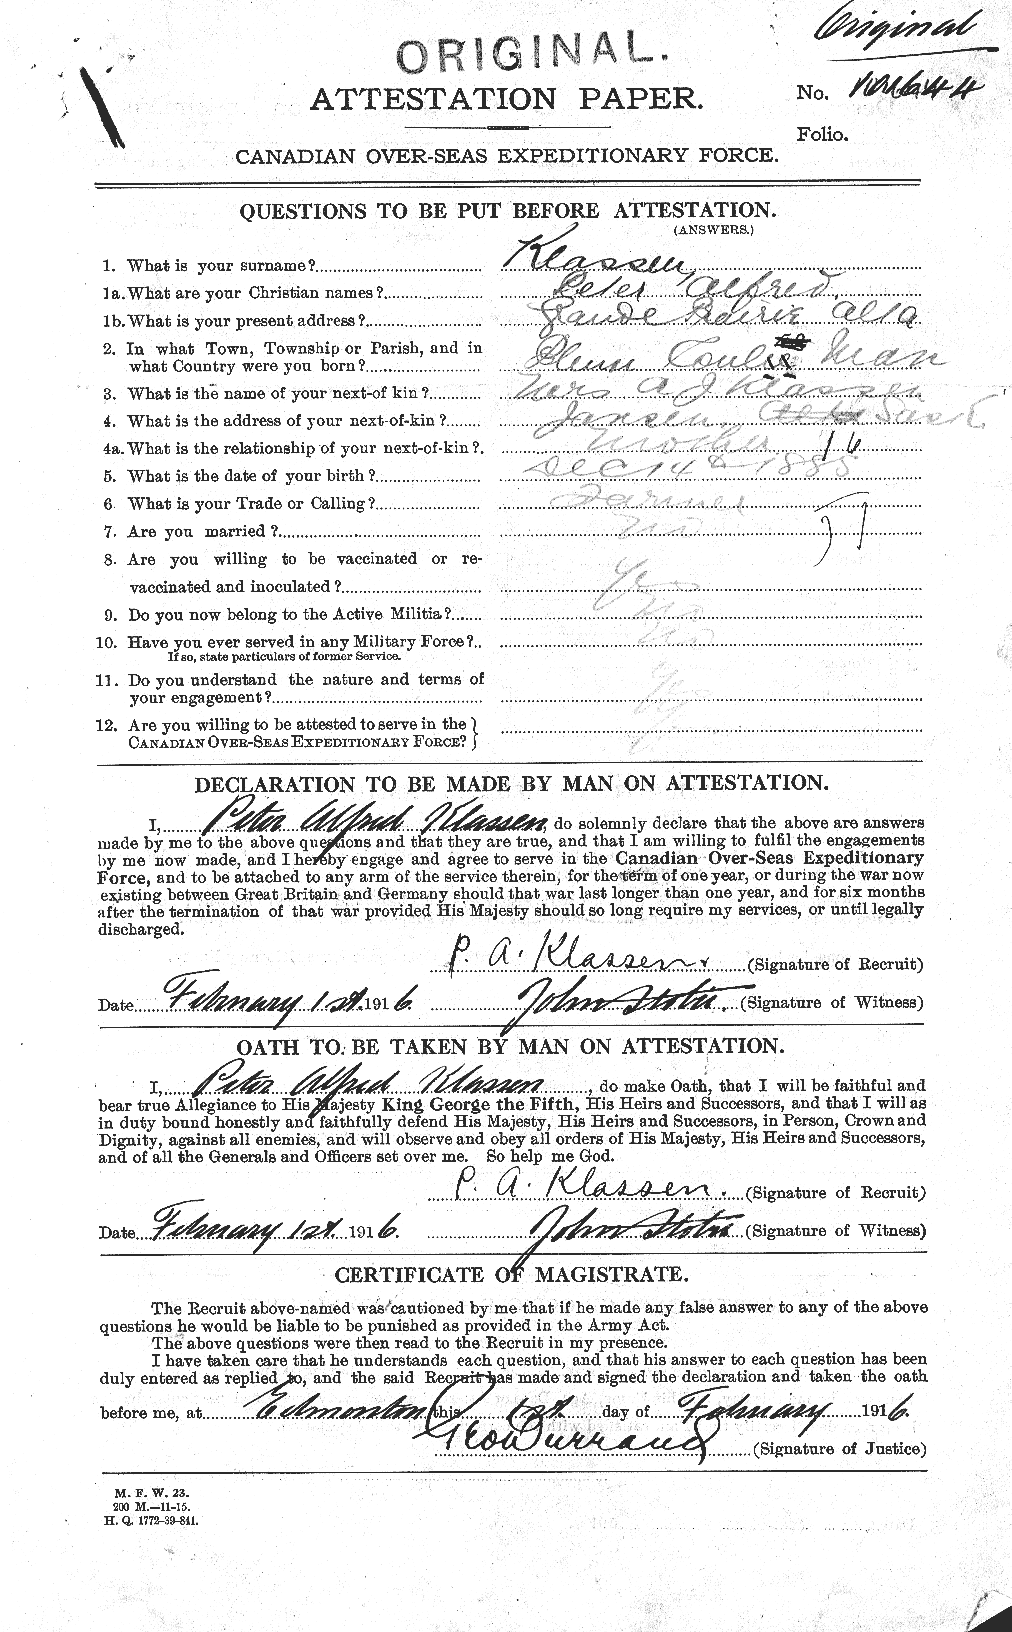 Personnel Records of the First World War - CEF 438738a